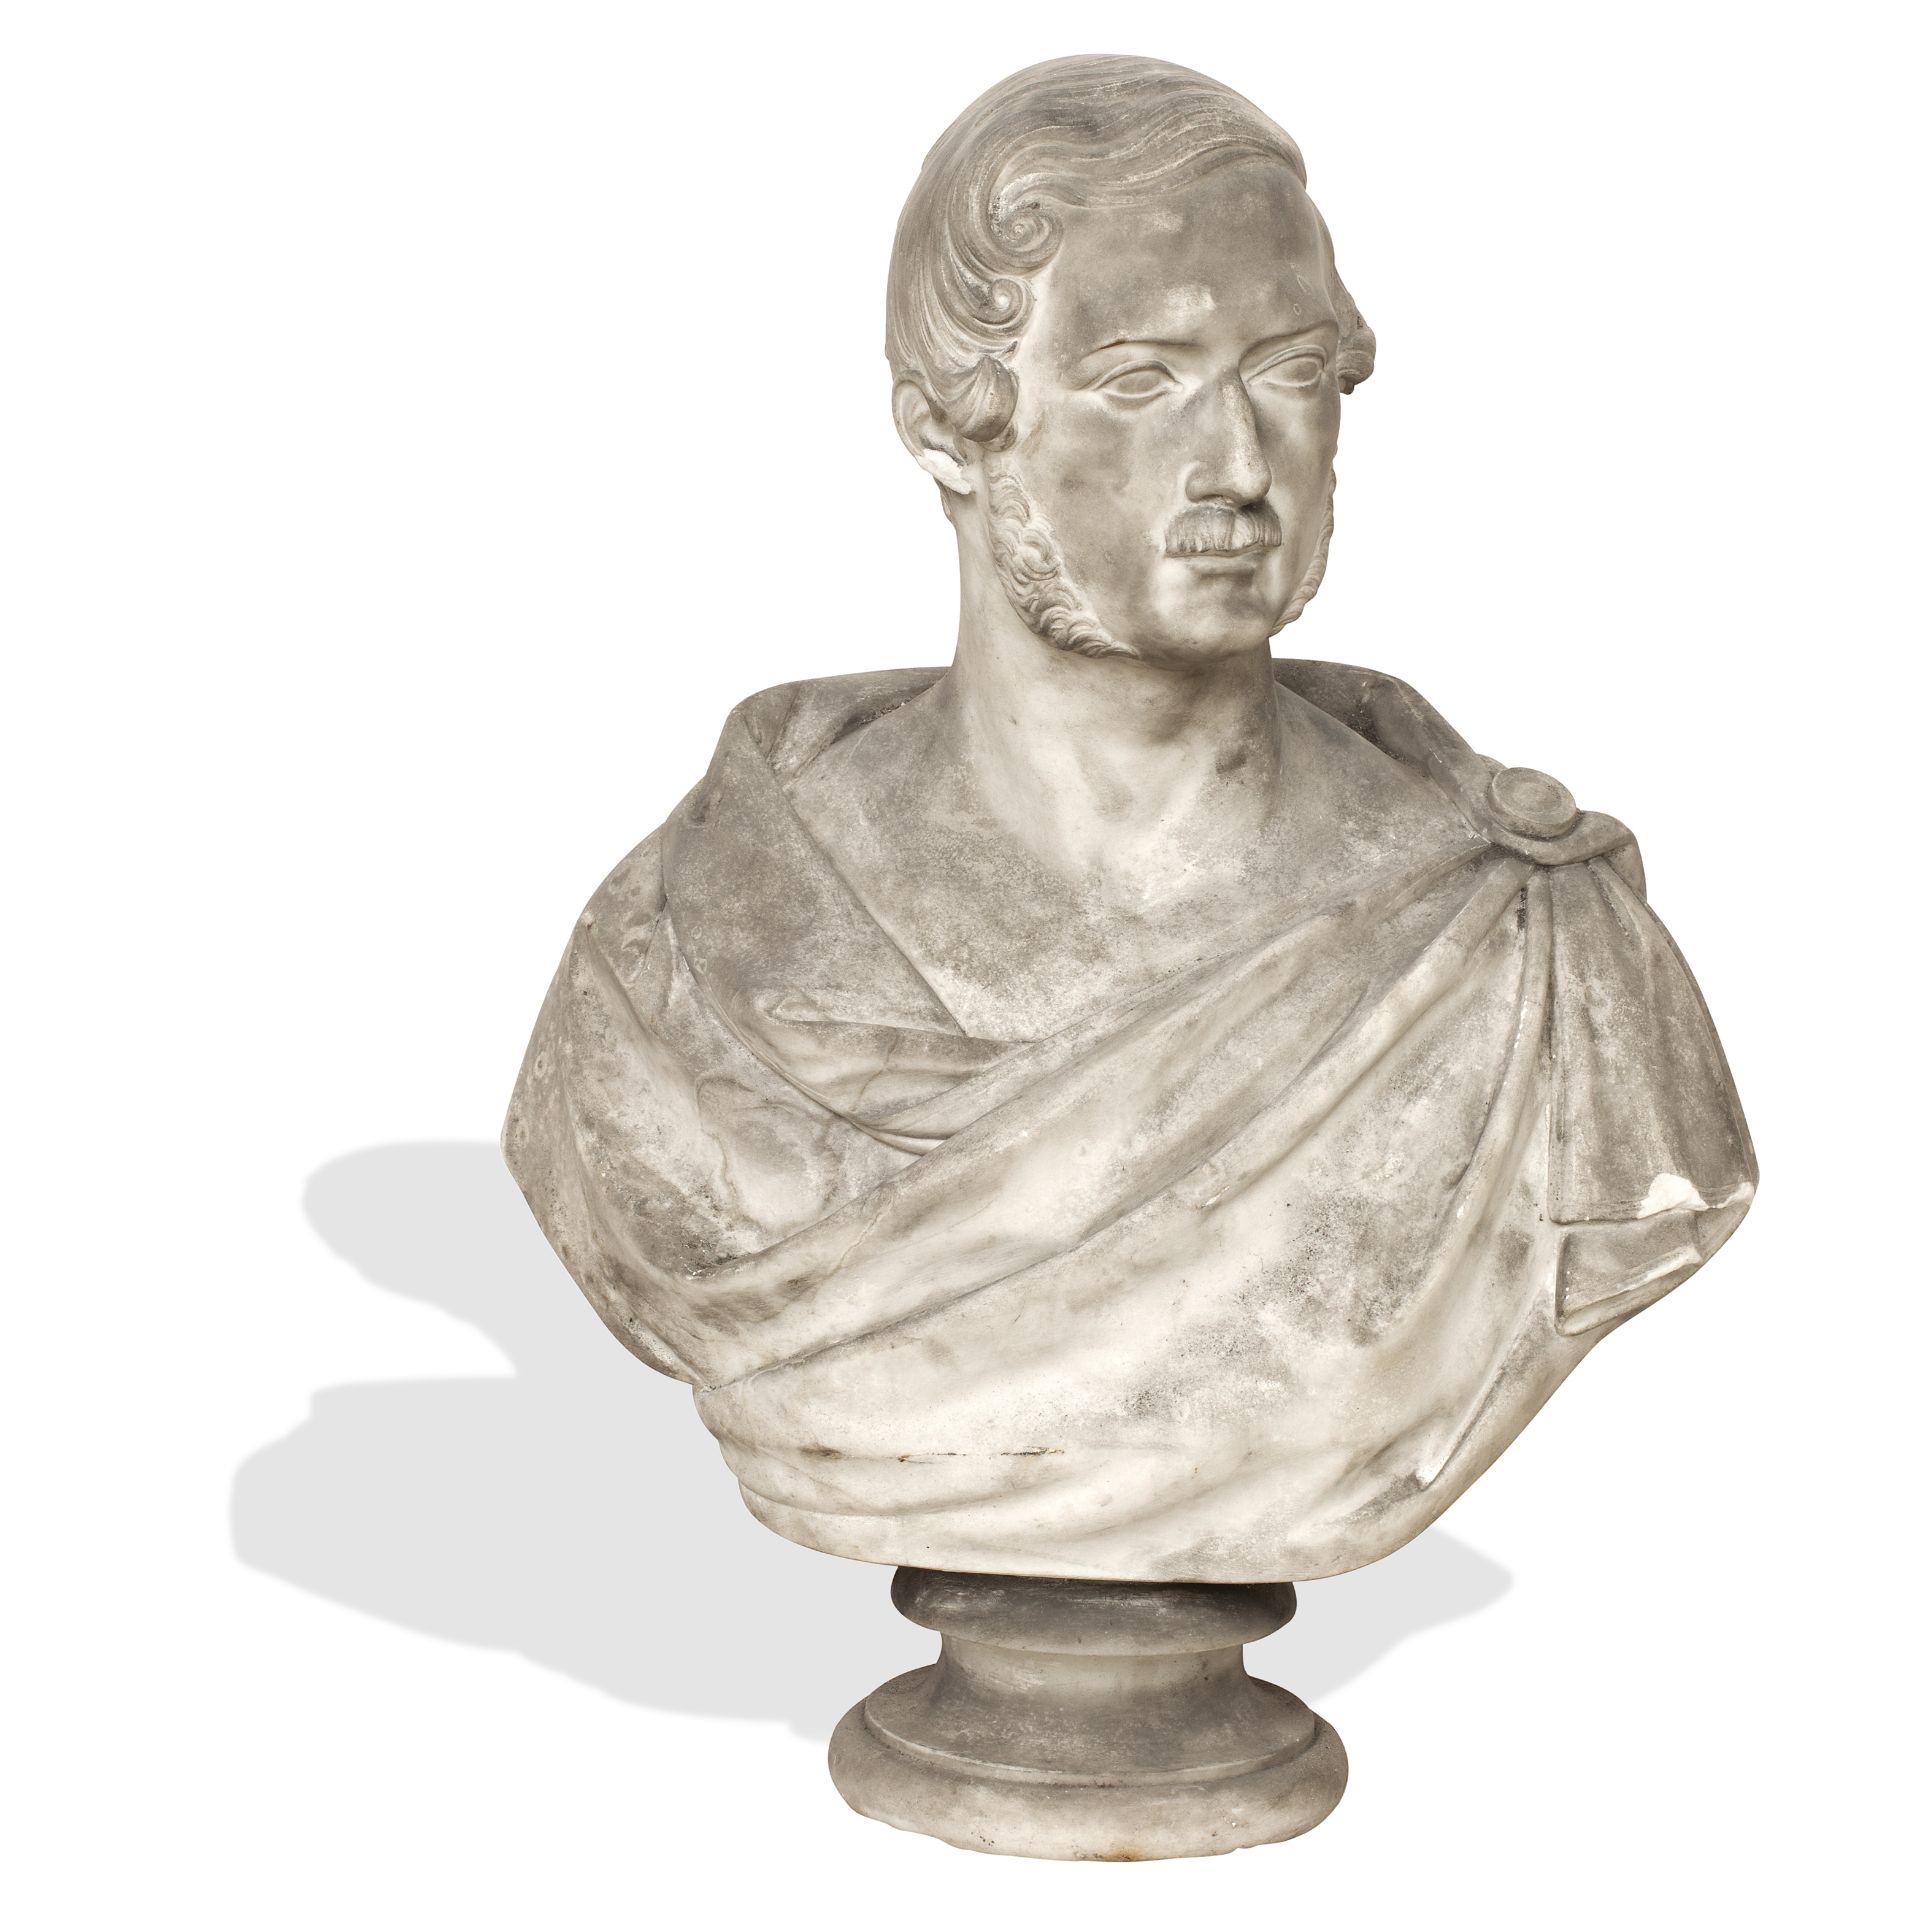 A mid-19th century white marble bust of Prince Albert By John Francis (British, 1780-1861)